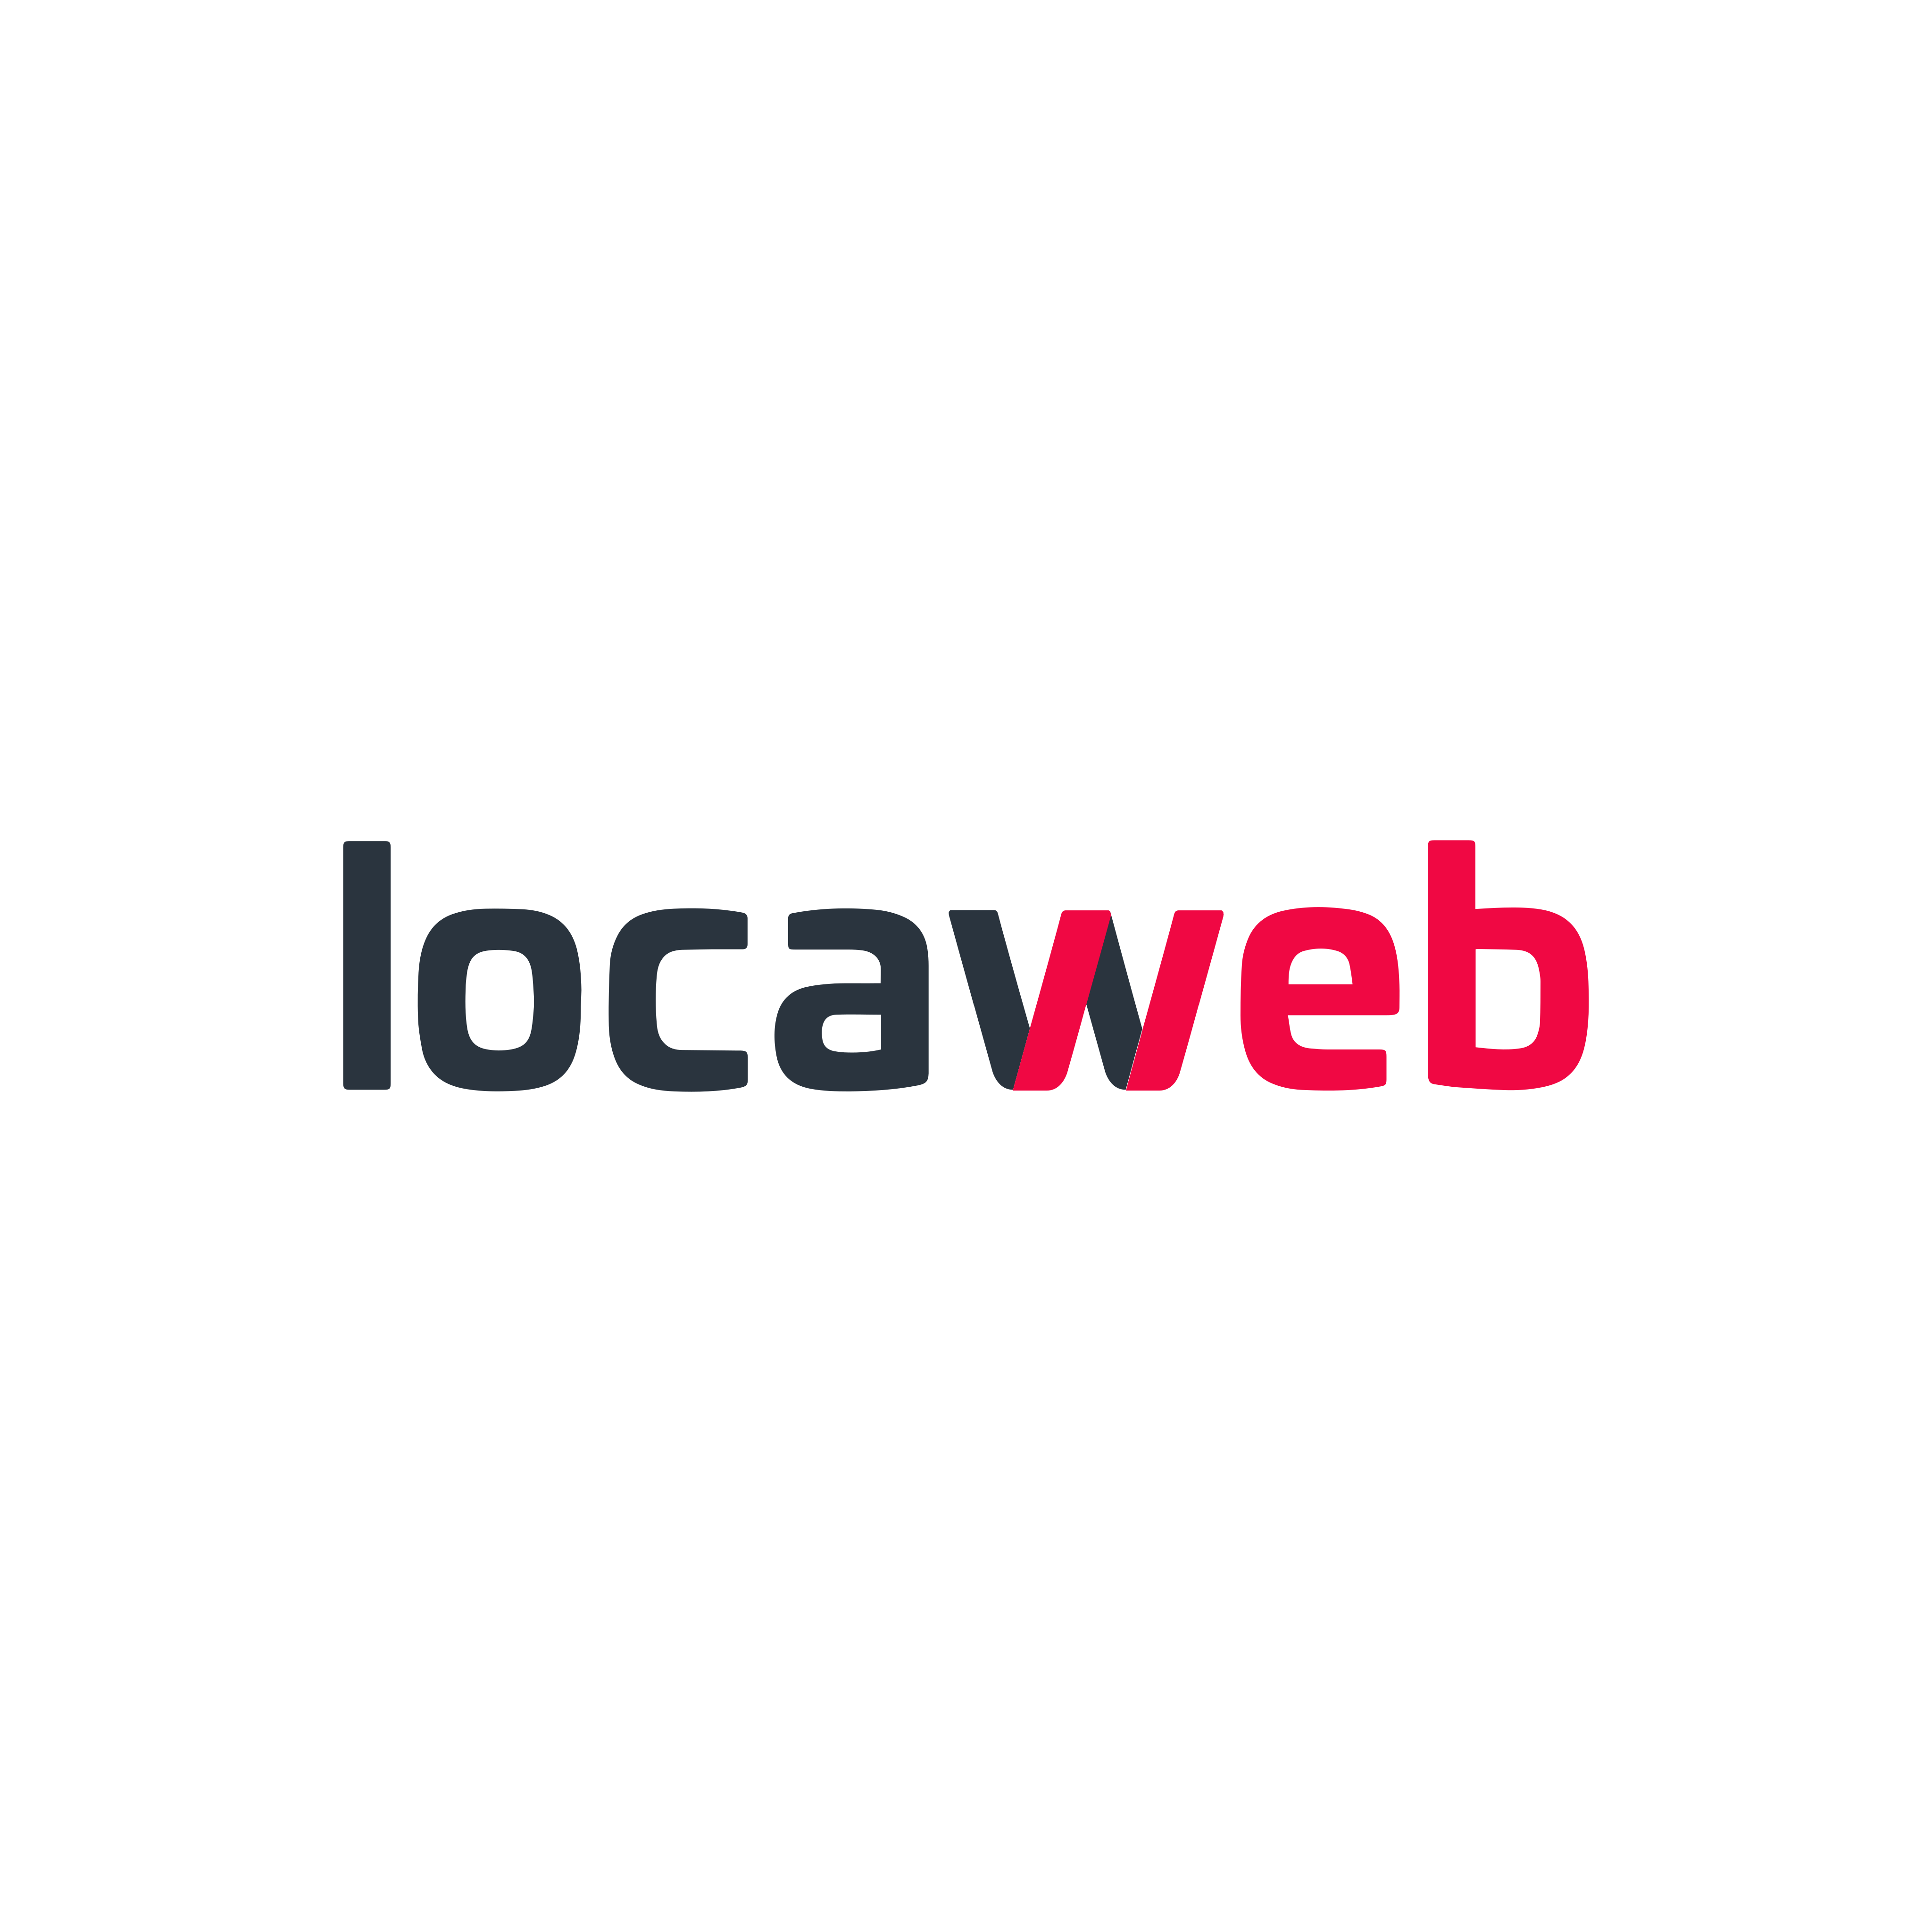 Image: Domain name registration with Locaweb